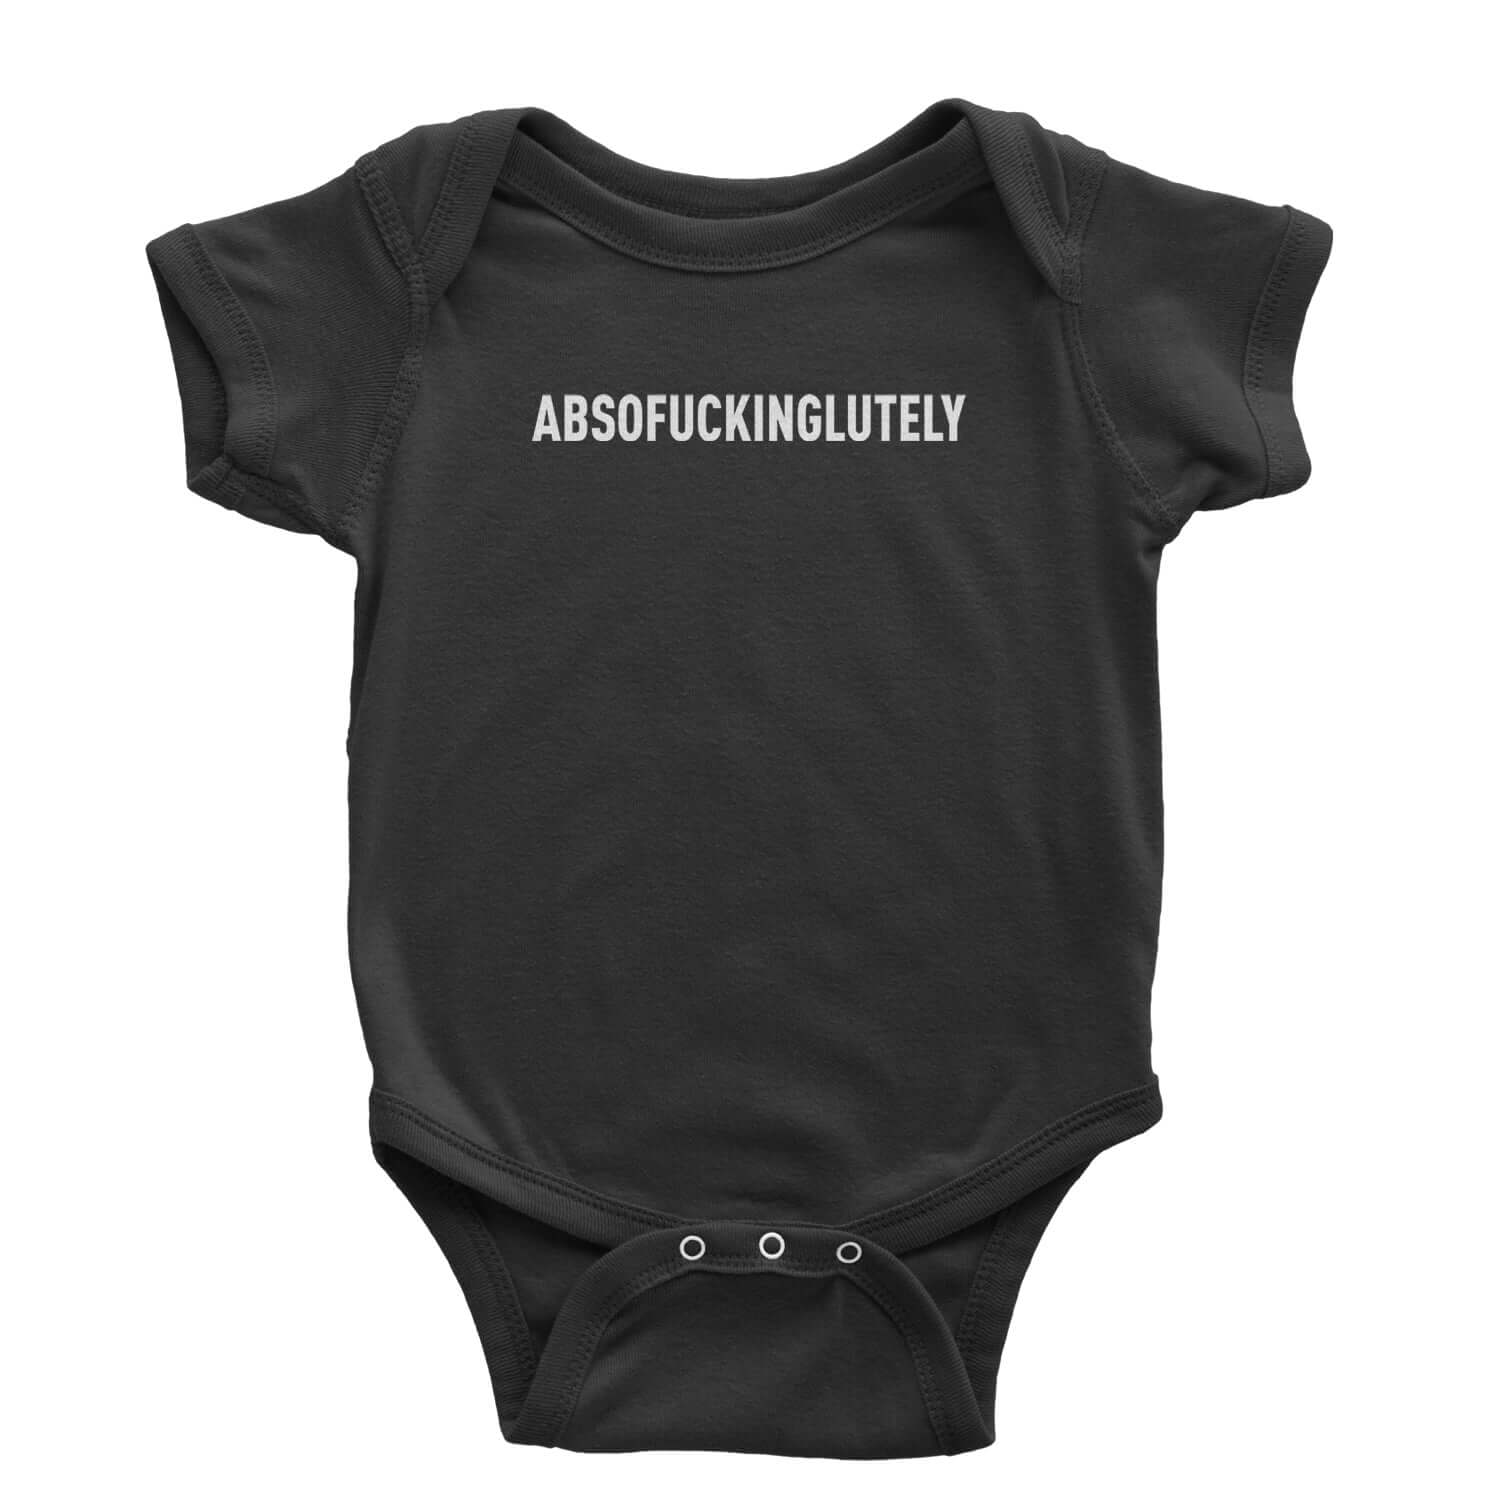 Abso f-cking lutely Infant One-Piece Romper Bodysuit and Toddler T-shirt funny, shirt by Expression Tees